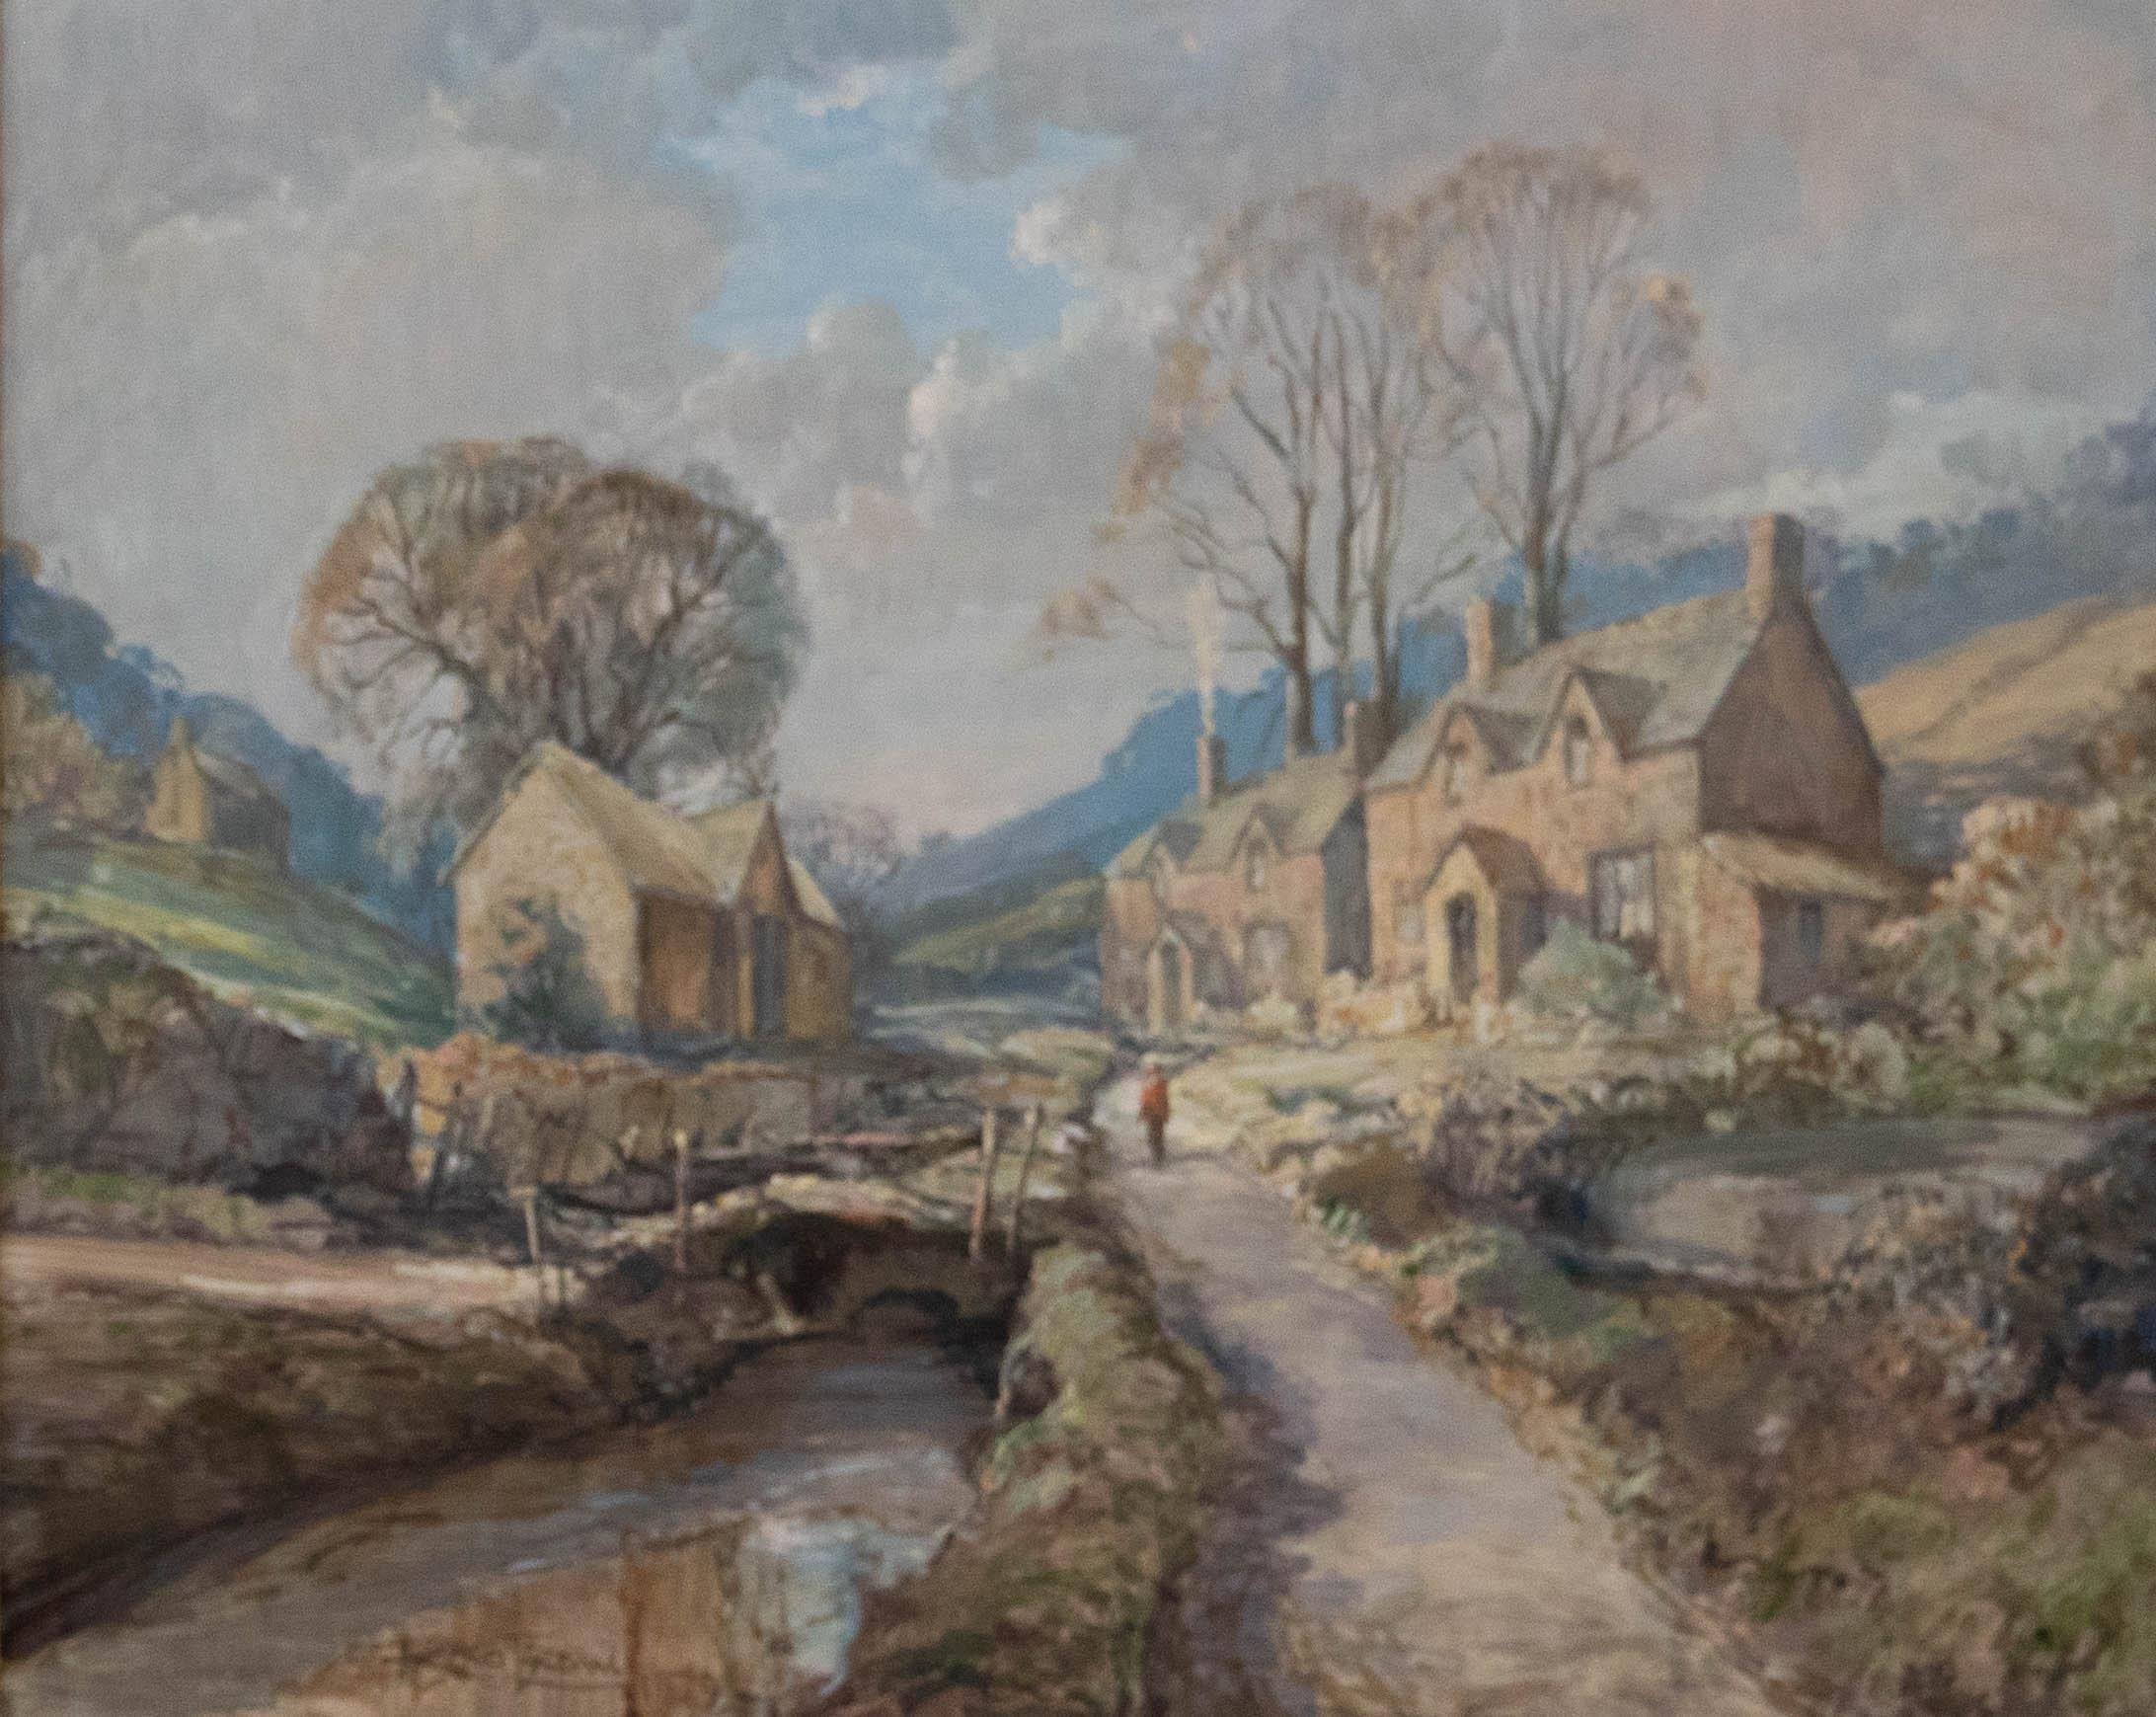 R. G. Trow - Framed 20th Century Oil, Stow-on-the-Wold - Painting by Unknown